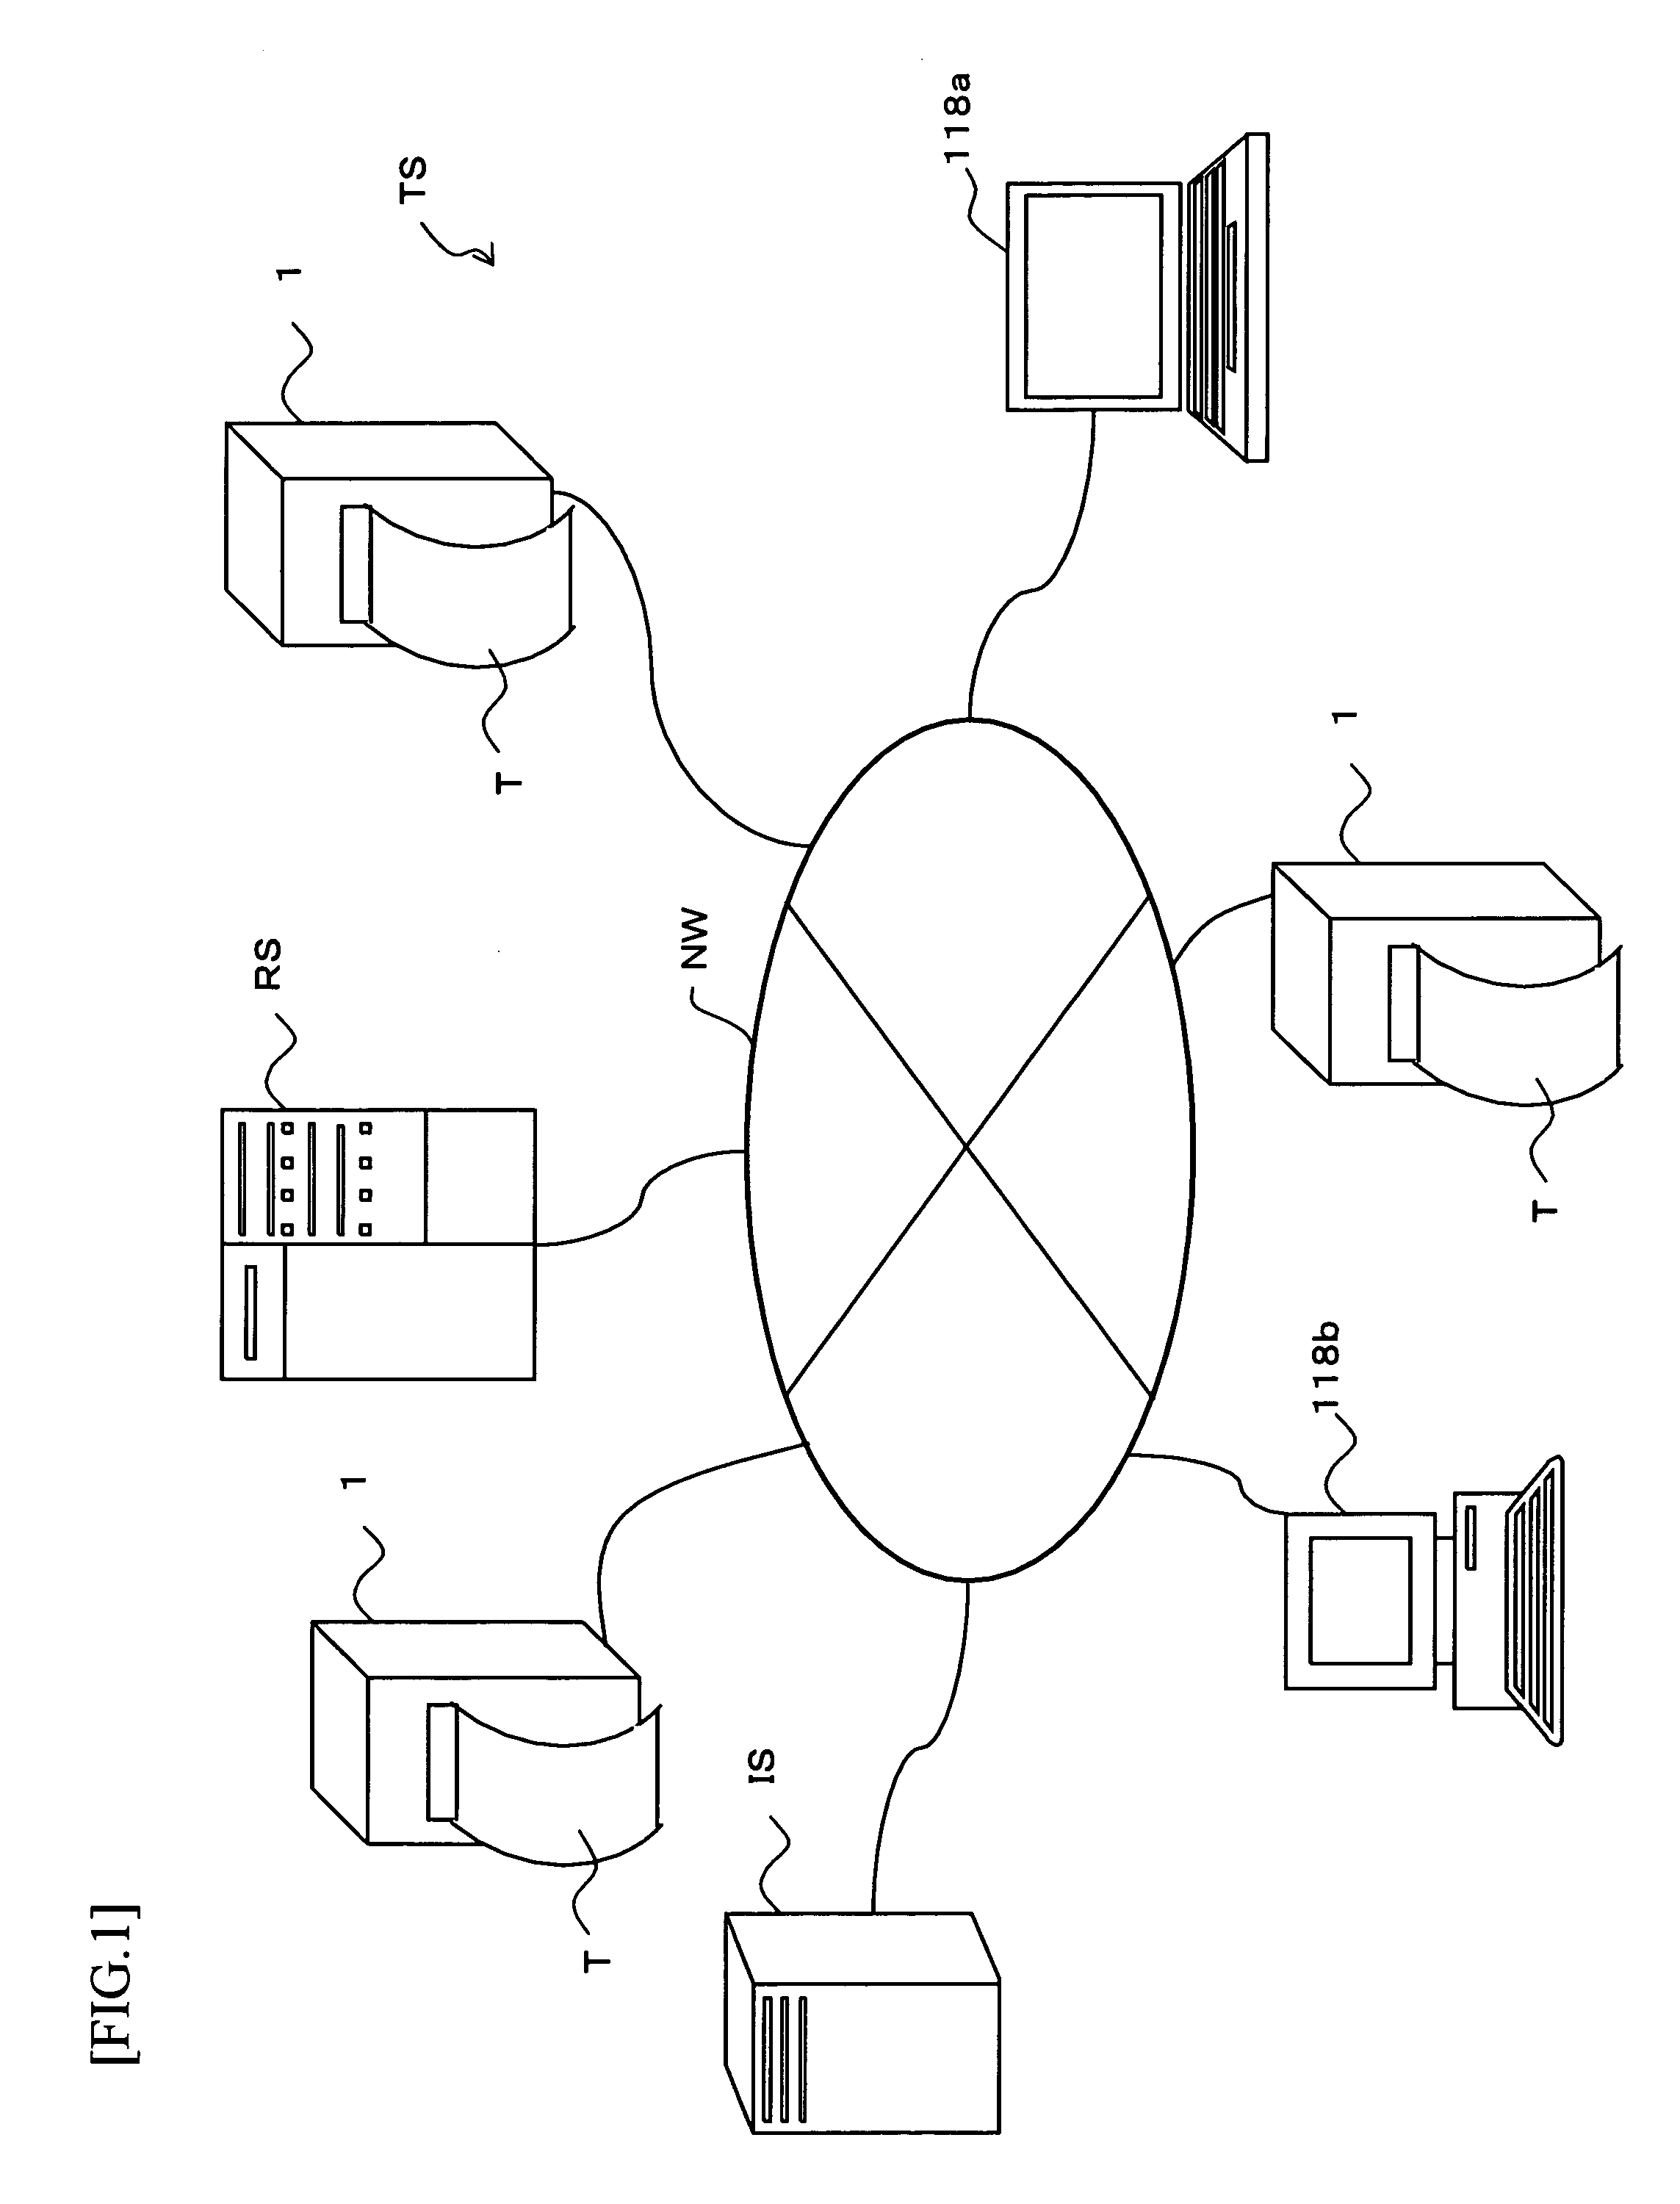 Label tape, label tape cartridge, and label producing apparatus